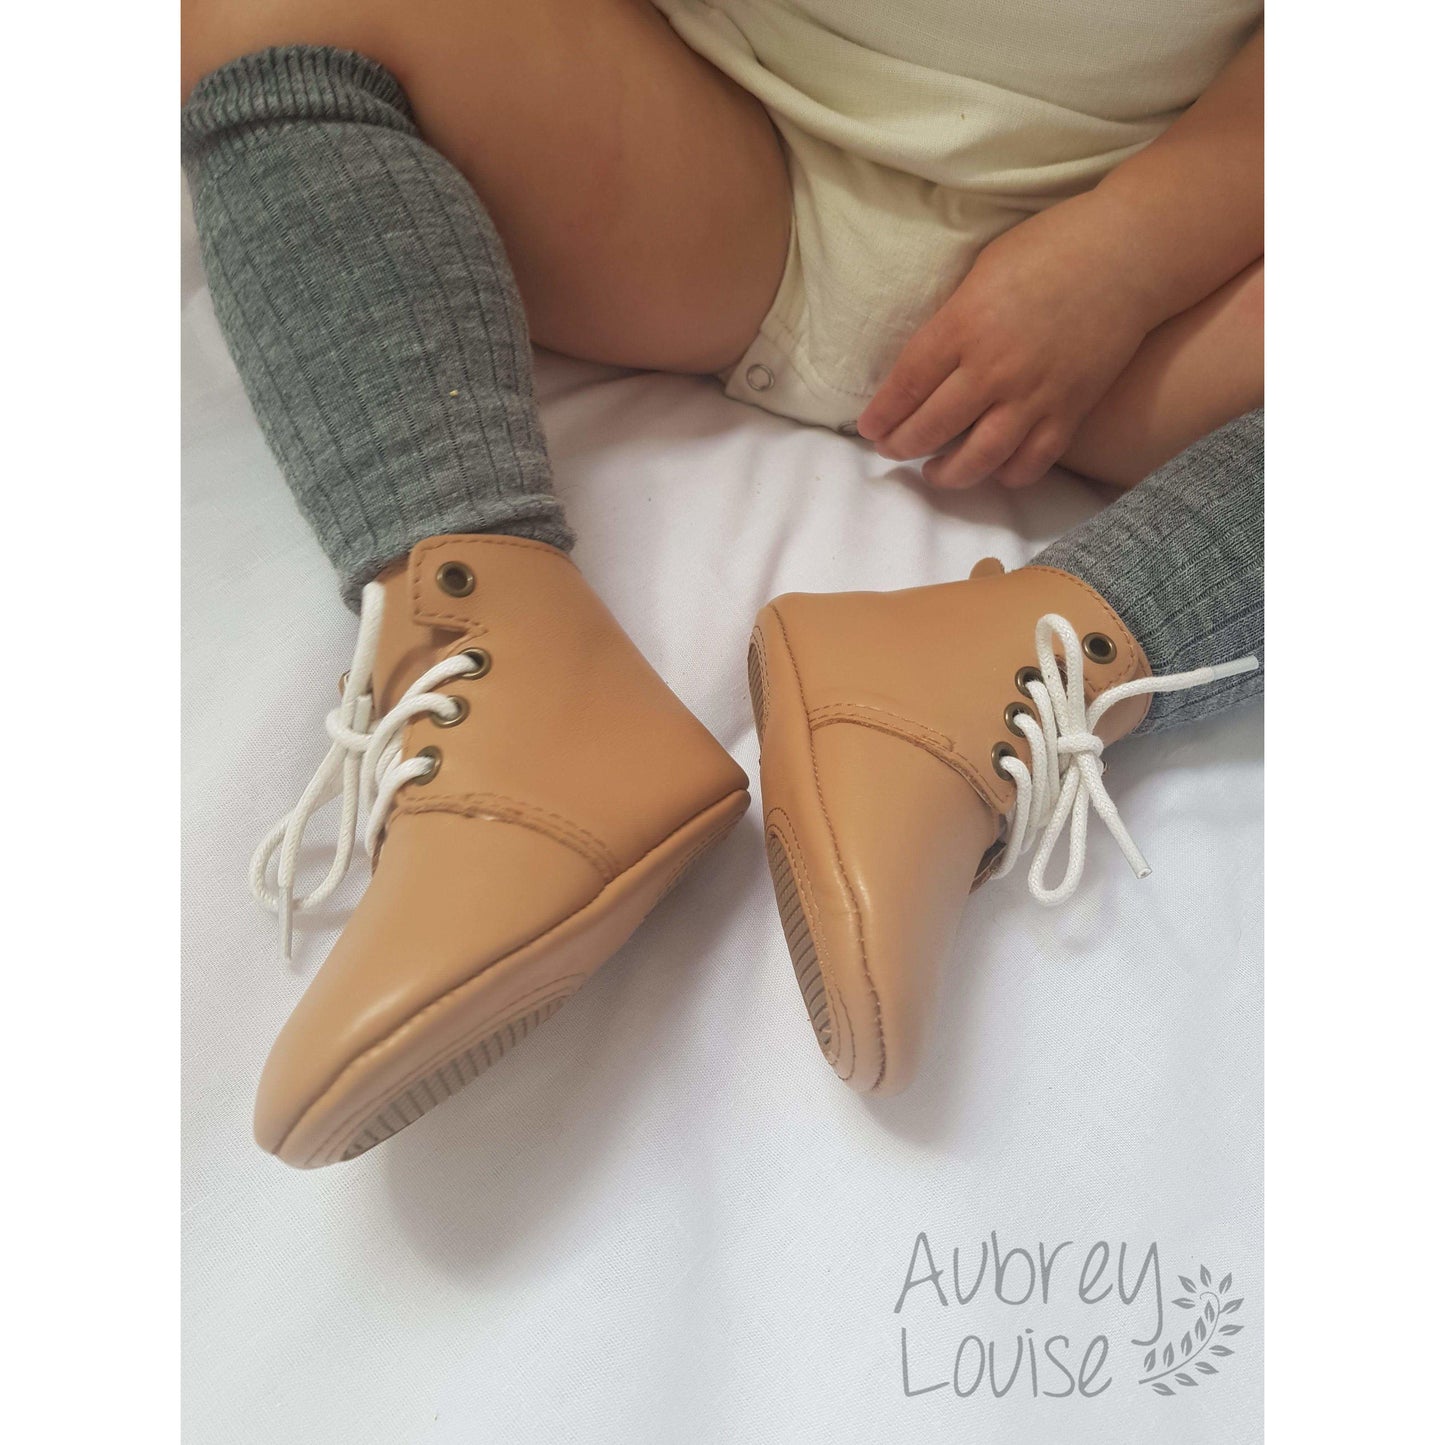 Aubrey Louise Shoes 2 / Brown Oxford Boot non-slip sole